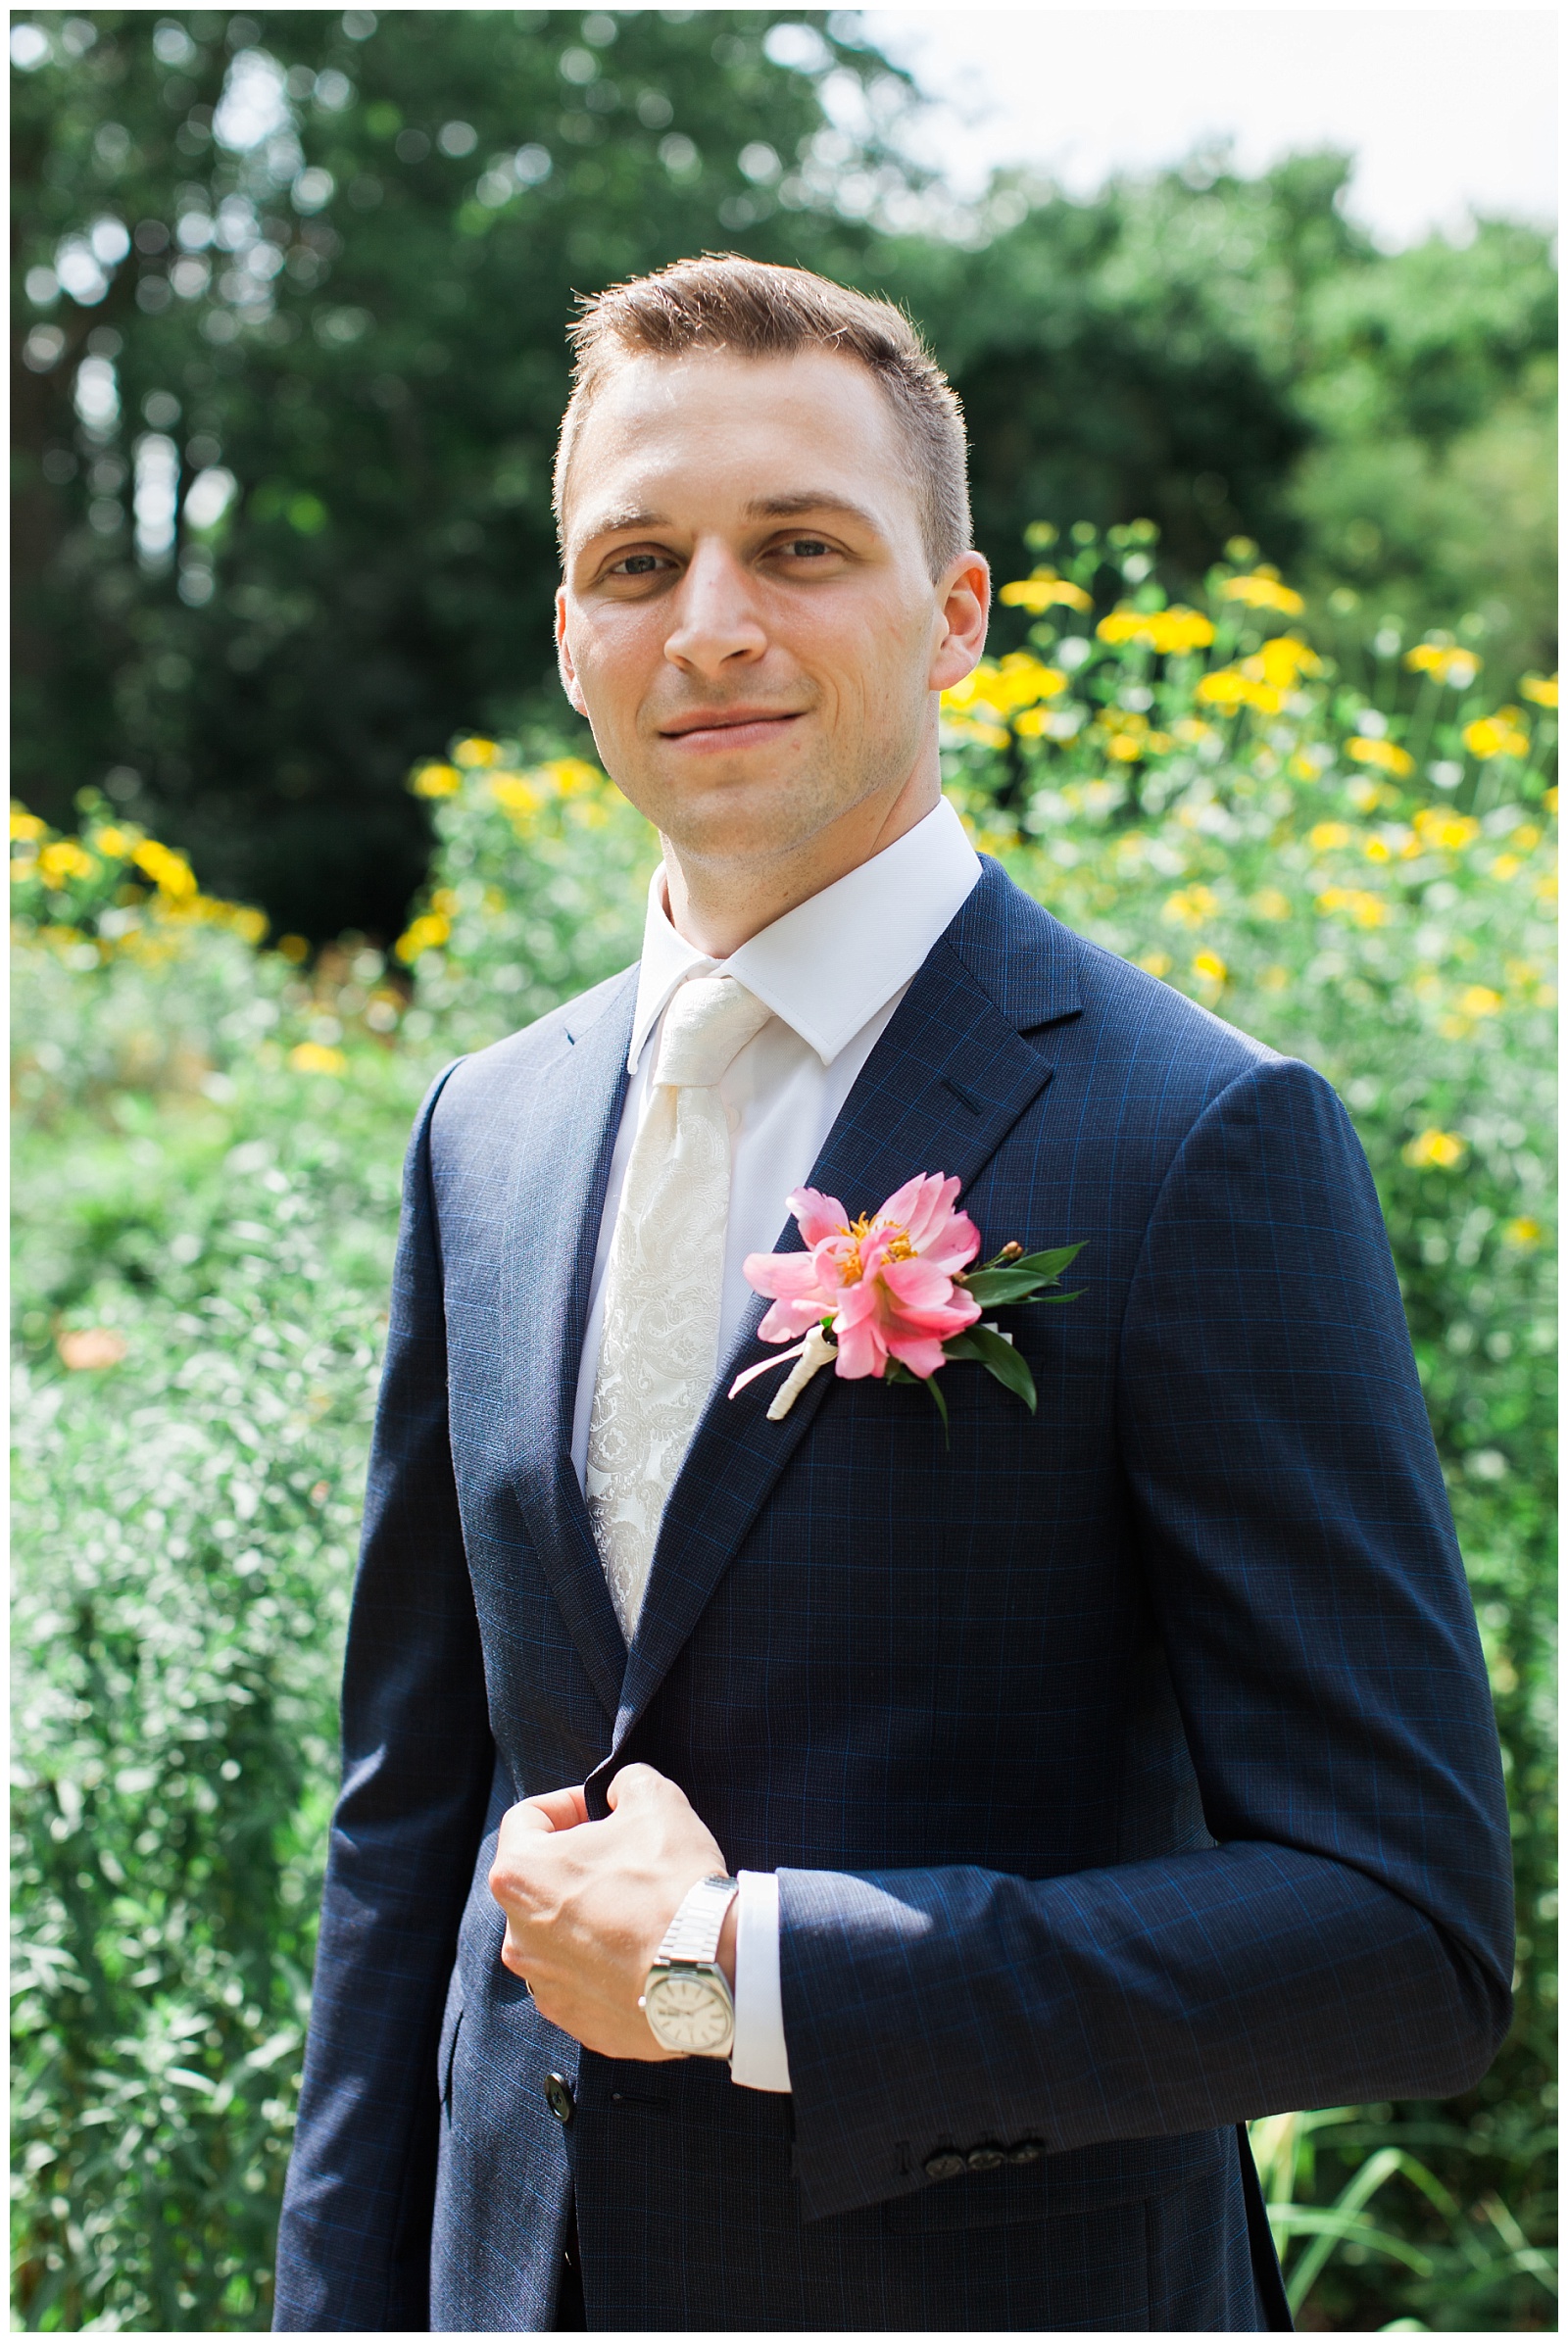 Handsome groom in navy pinstripe suit with watch and pink boutonniere at Guelph Ontario Wedding | Ontario Wedding Photographer | Toronto Wedding Photographer | 3photography